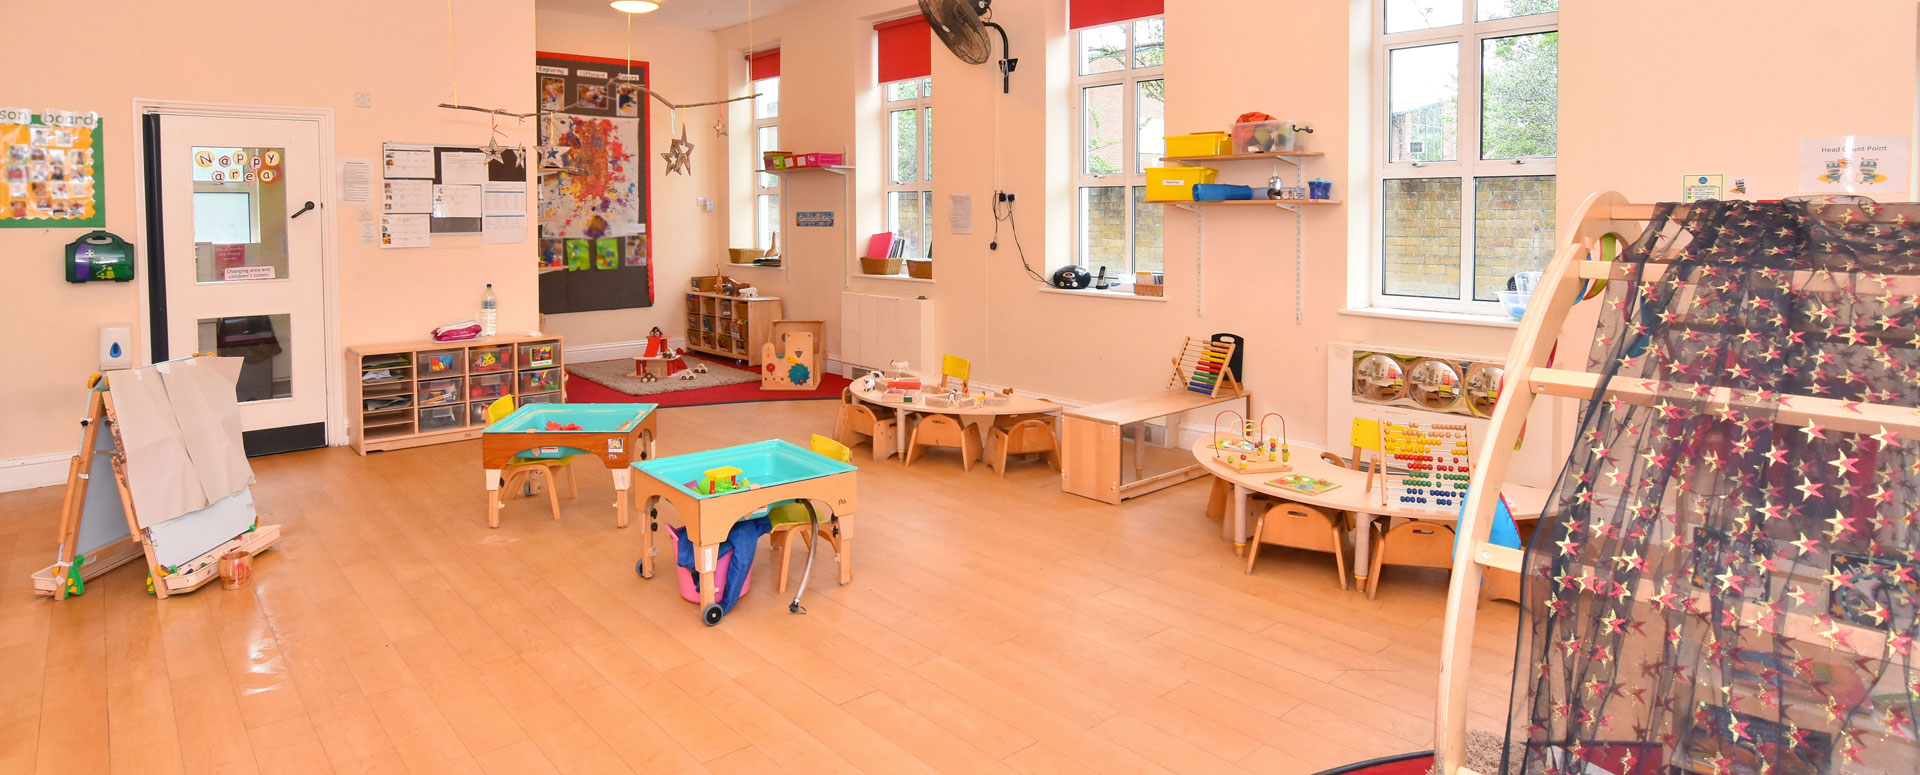 Active Learning Fulham Day Nursery and Preschool